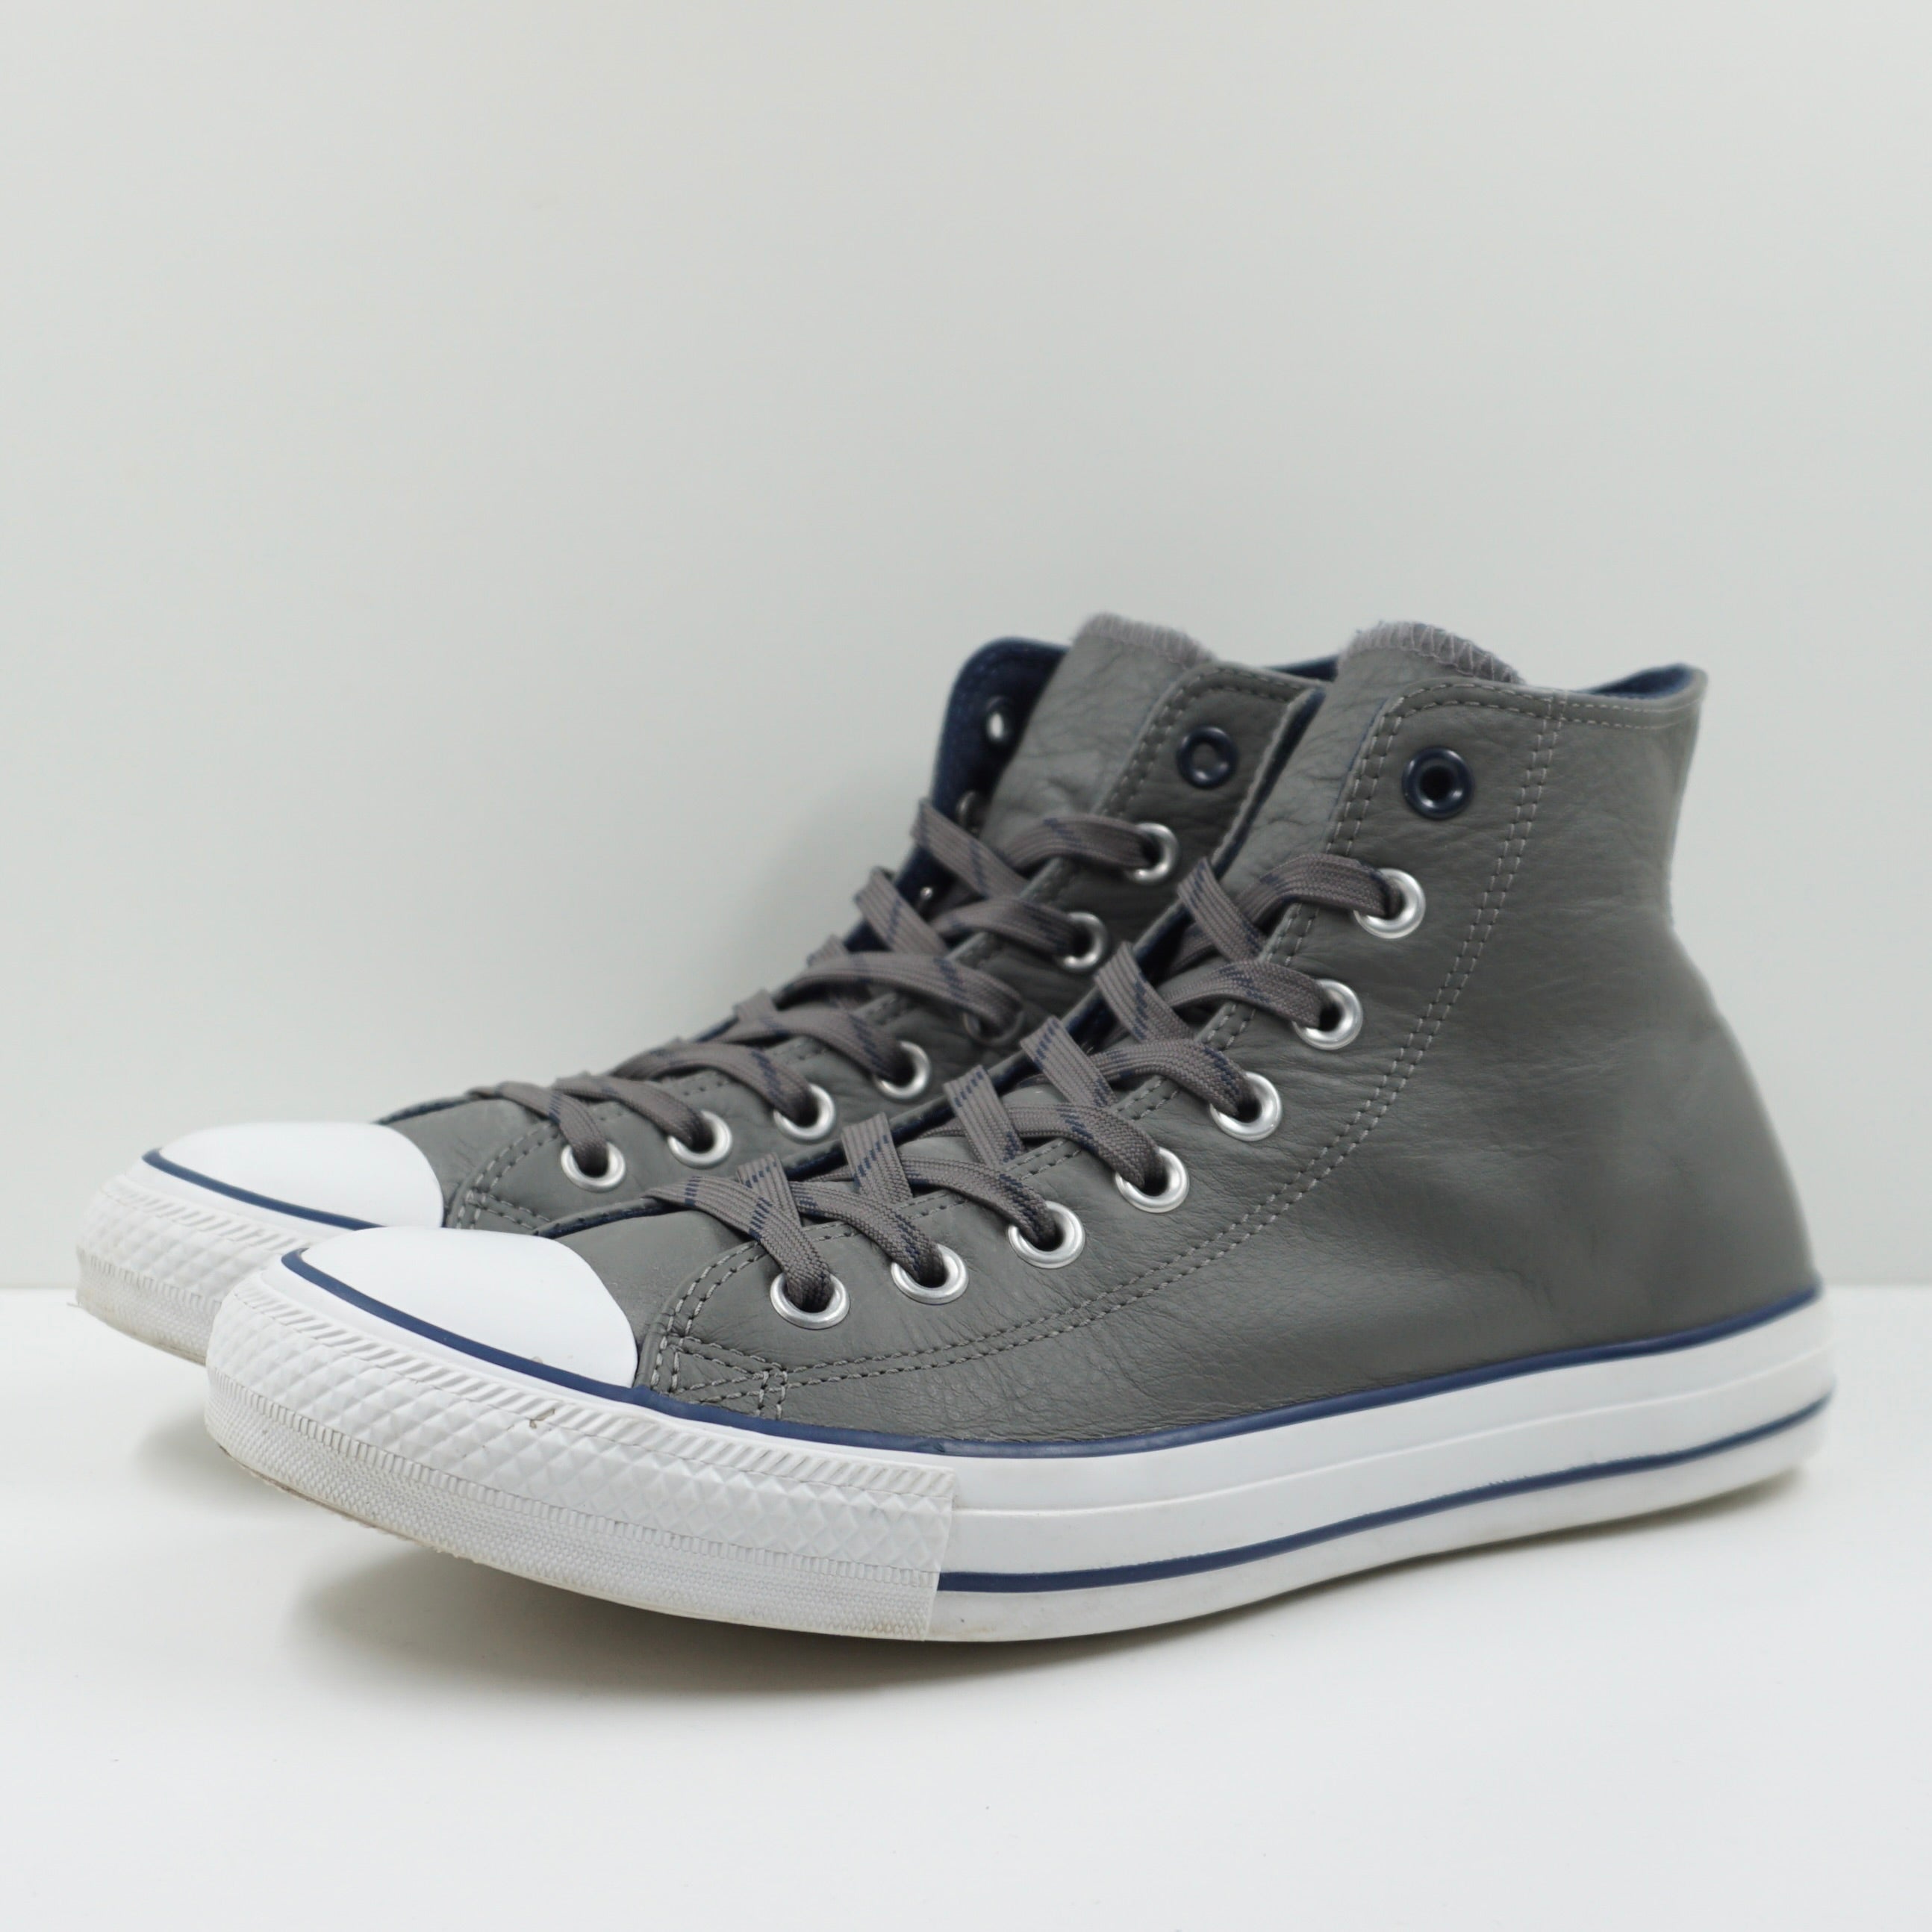 Converse Chuck Taylor All Star Leather High Charcoal Grey